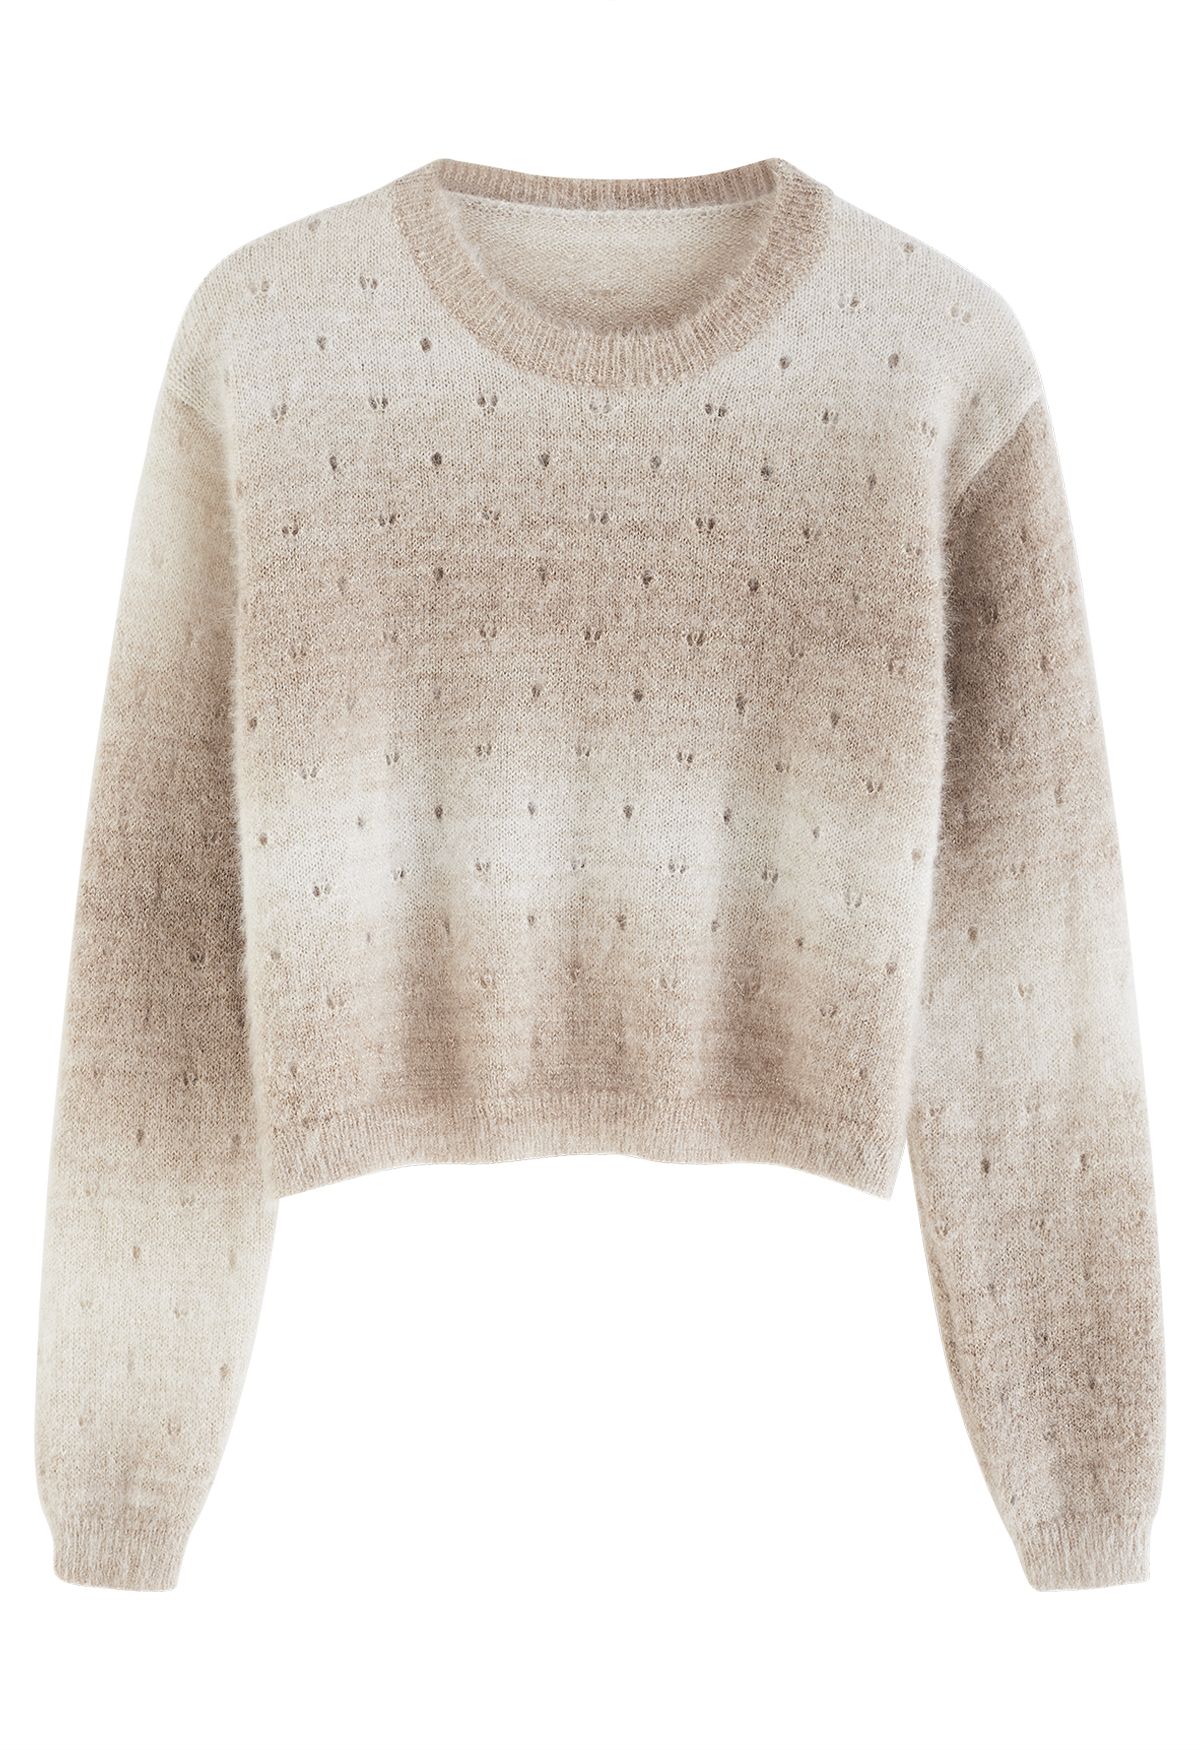 Ombre Eyelet Fuzzy Crop Sweater بلون أسمر فاتح